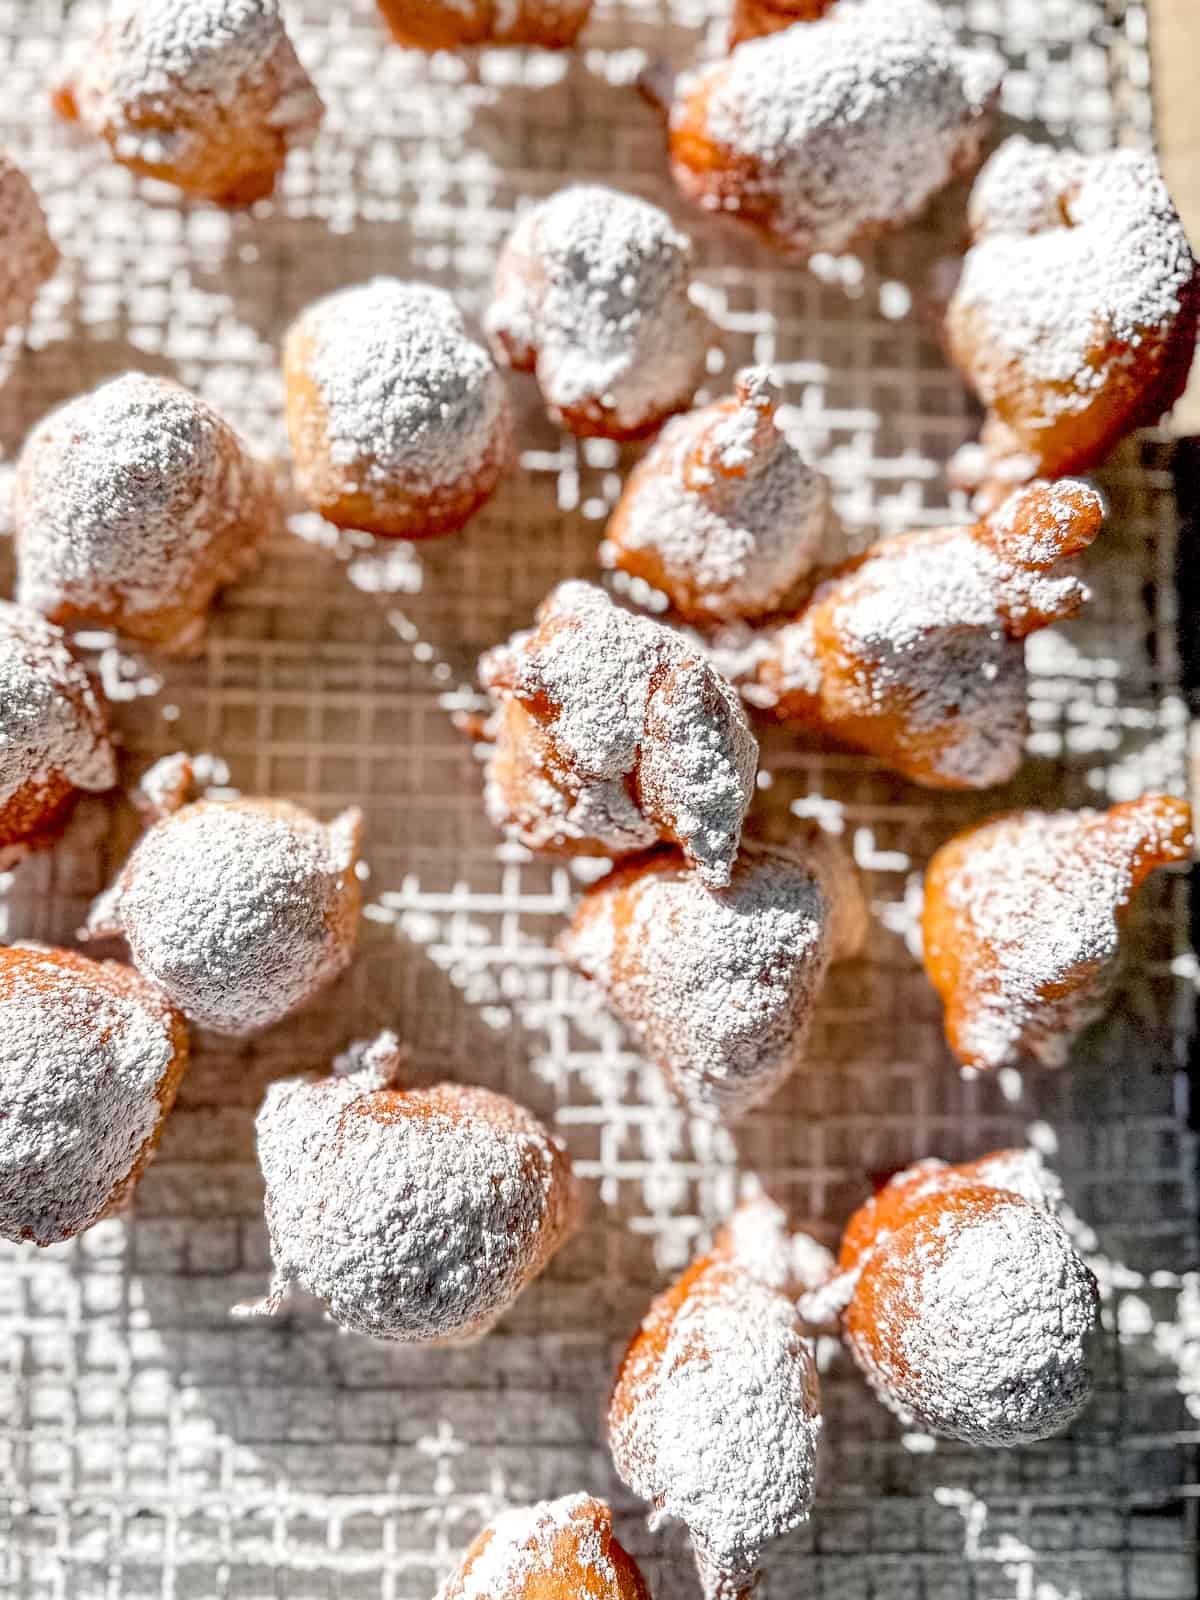 Zeppole with powdered sugar on a wire rack.